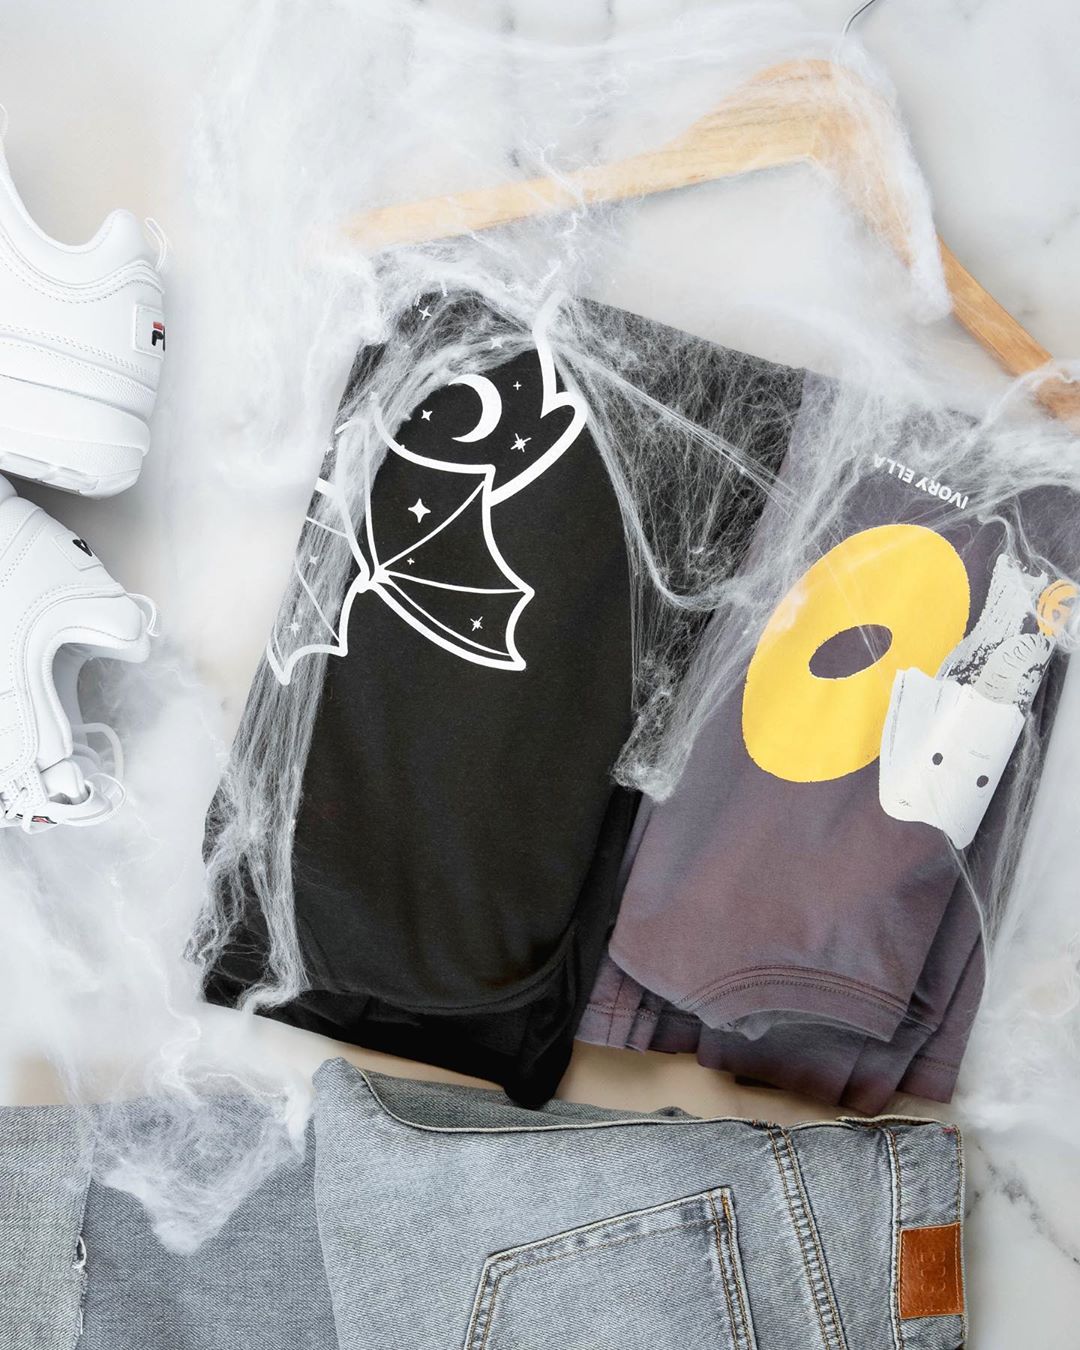 Ivory Ella - Trick or Treat yo'self this spooky season with our festive Halloween Tees! 👻 Spider webs not included 🕸️ 🕷️ #WrittenInTheStars #Fall2020